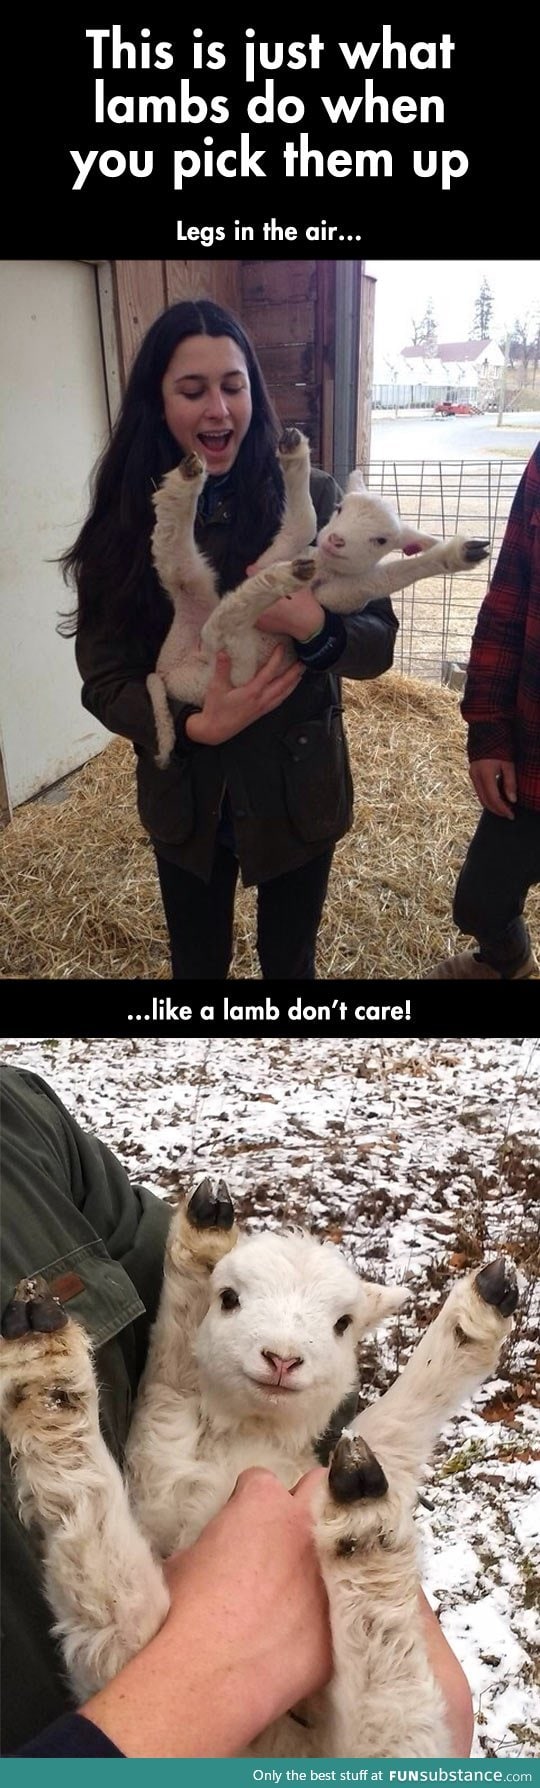 Lambs get adorable when you pick them up - FunSubstance